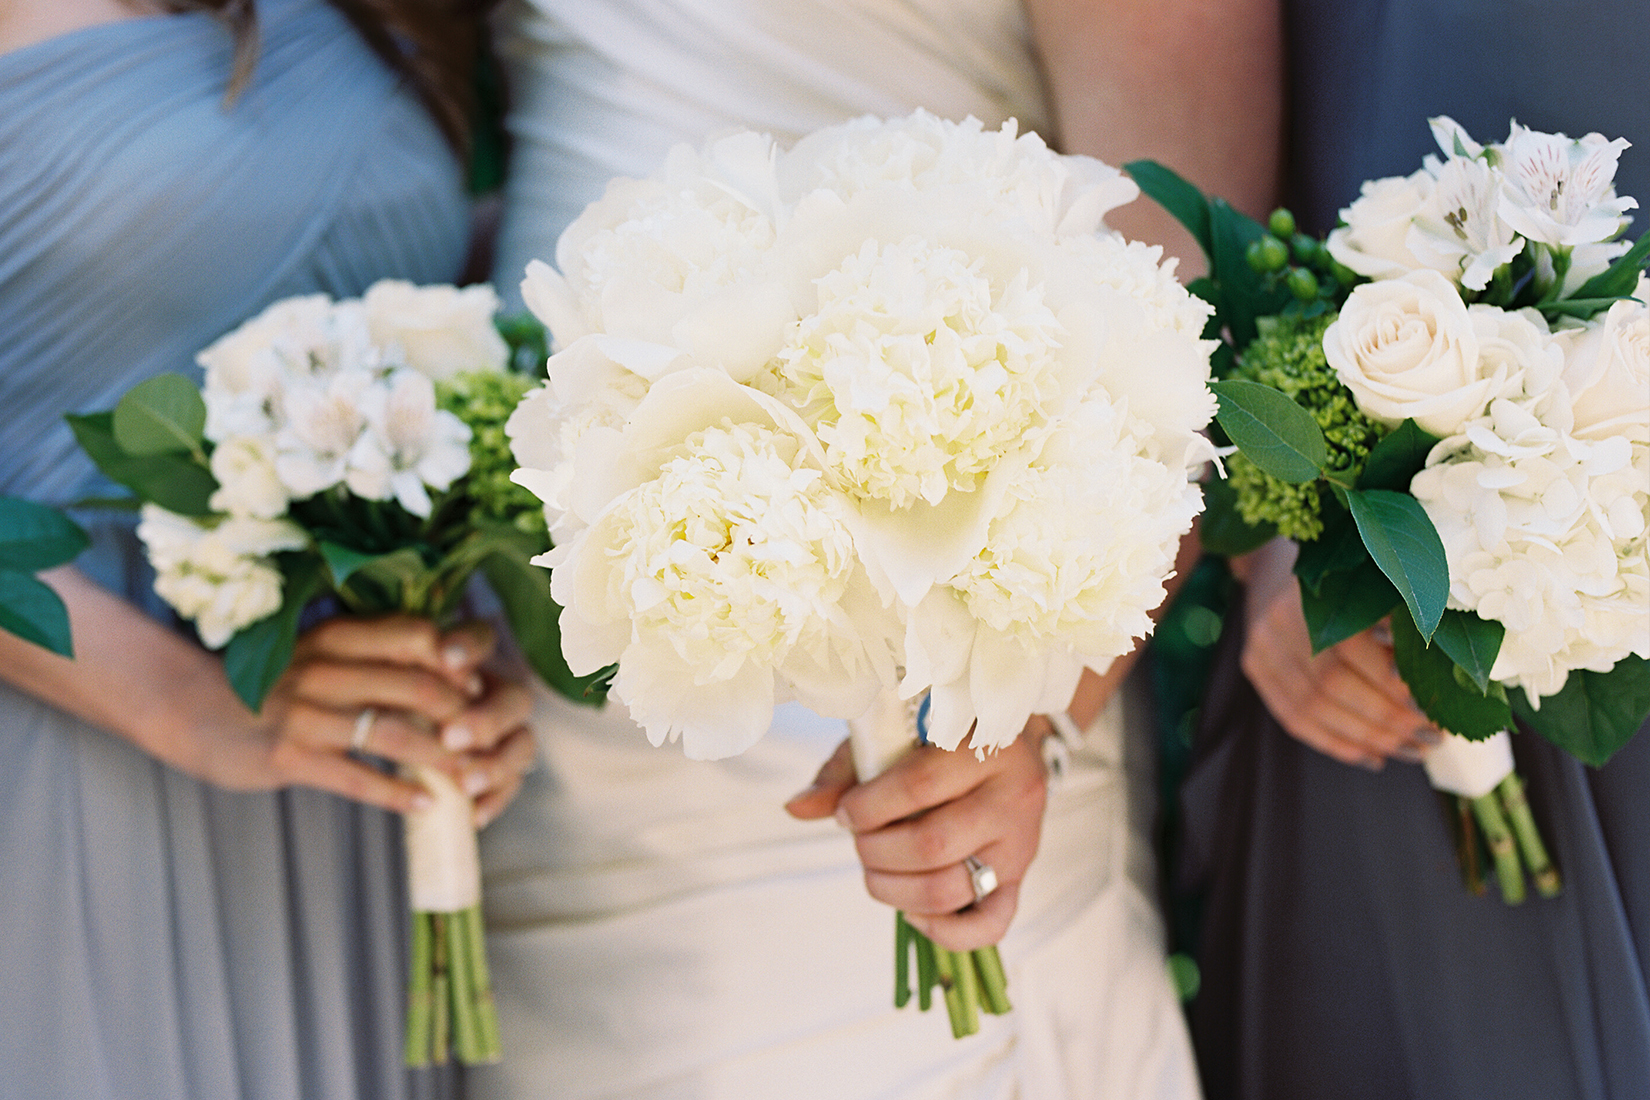 A close up image of the three white flowered wedding bouquets